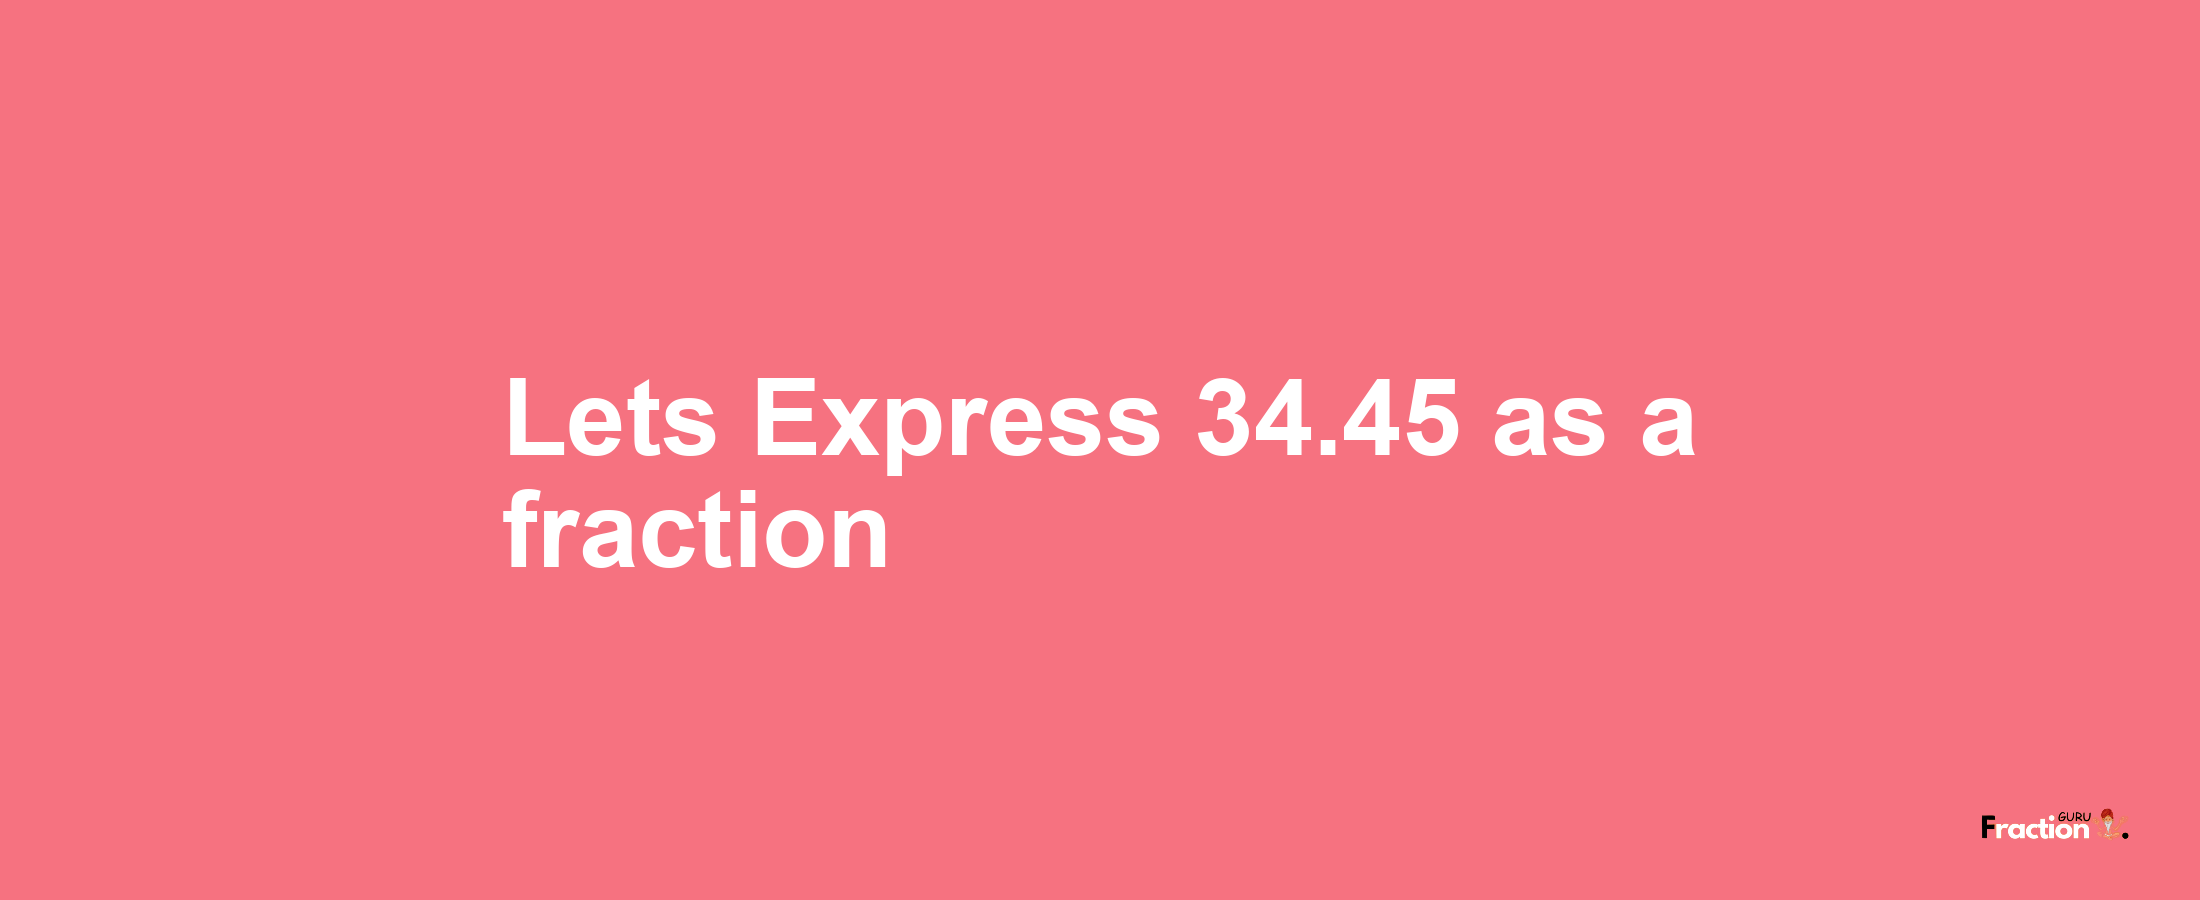 Lets Express 34.45 as afraction